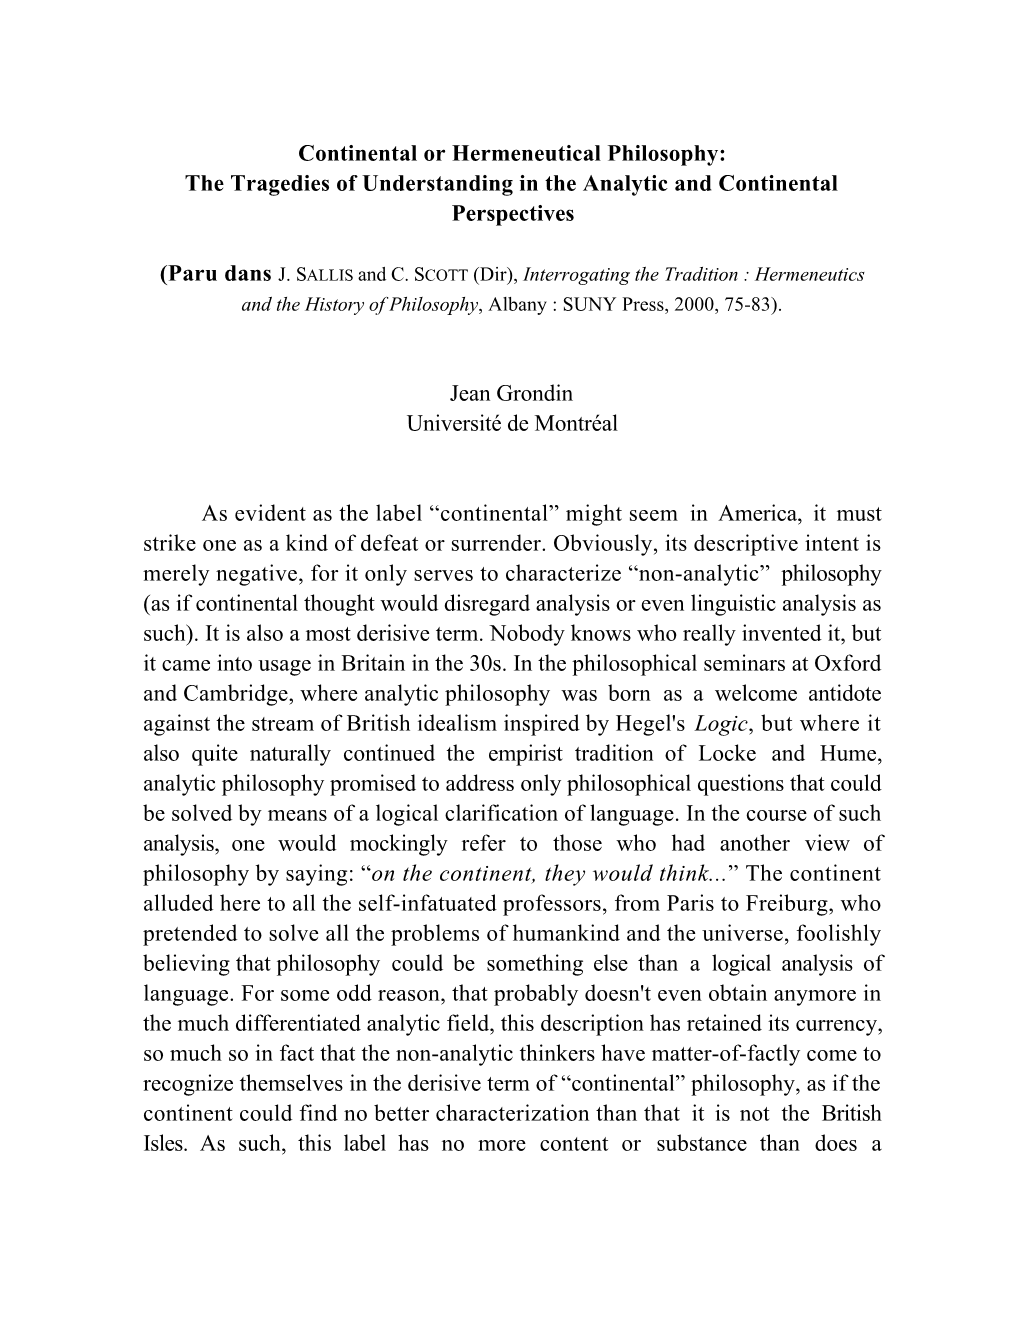 Continental Or Hermeneutical Philosophy: the Tragedies of Understanding in the Analytic and Continental Perspectives